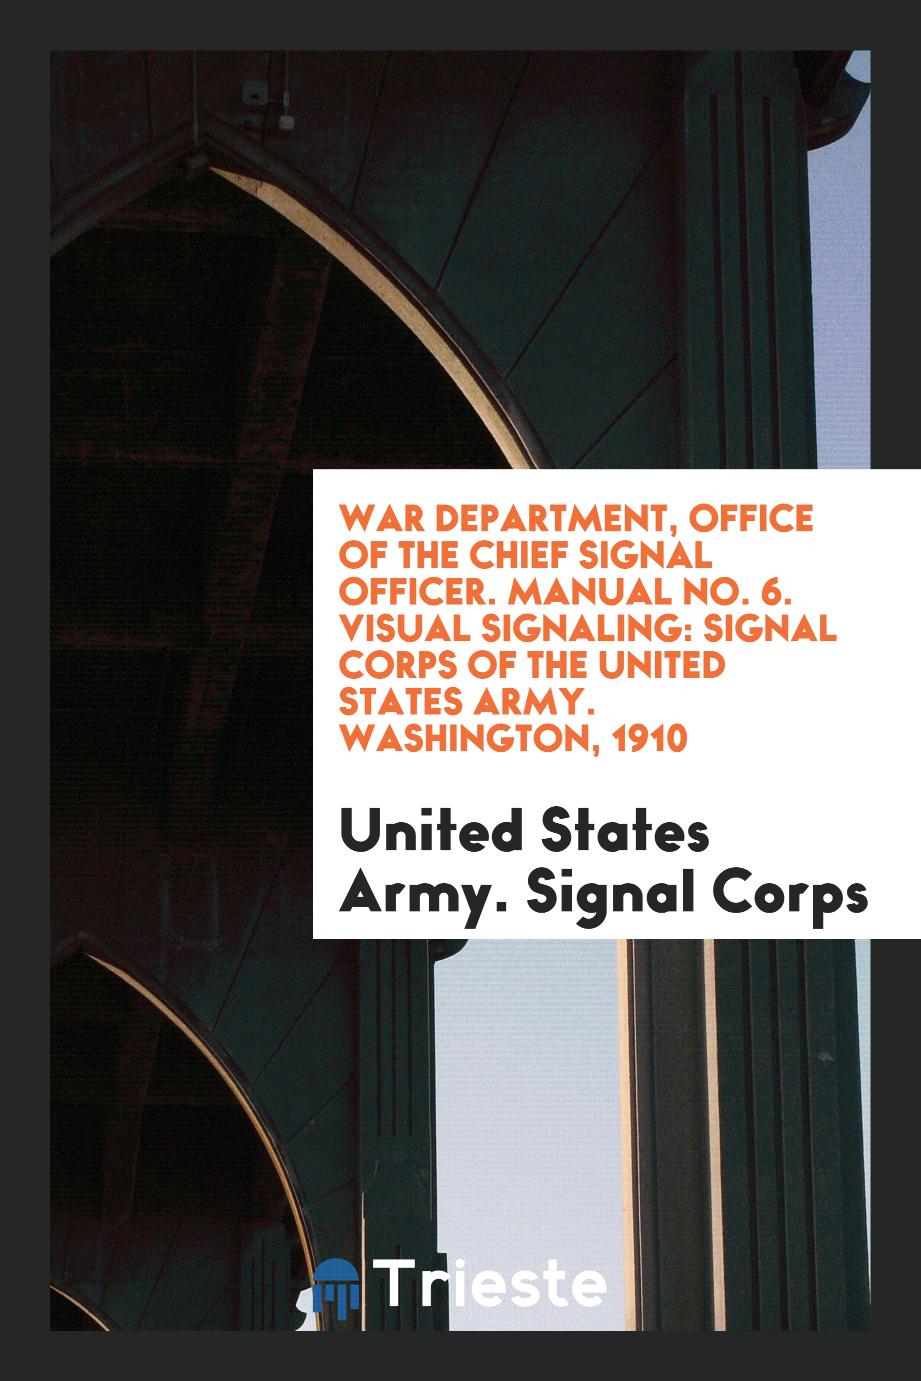 War Department, Office of the Chief Signal Officer. Manual No. 6. Visual Signaling: Signal Corps of the United States Army. Washington, 1910